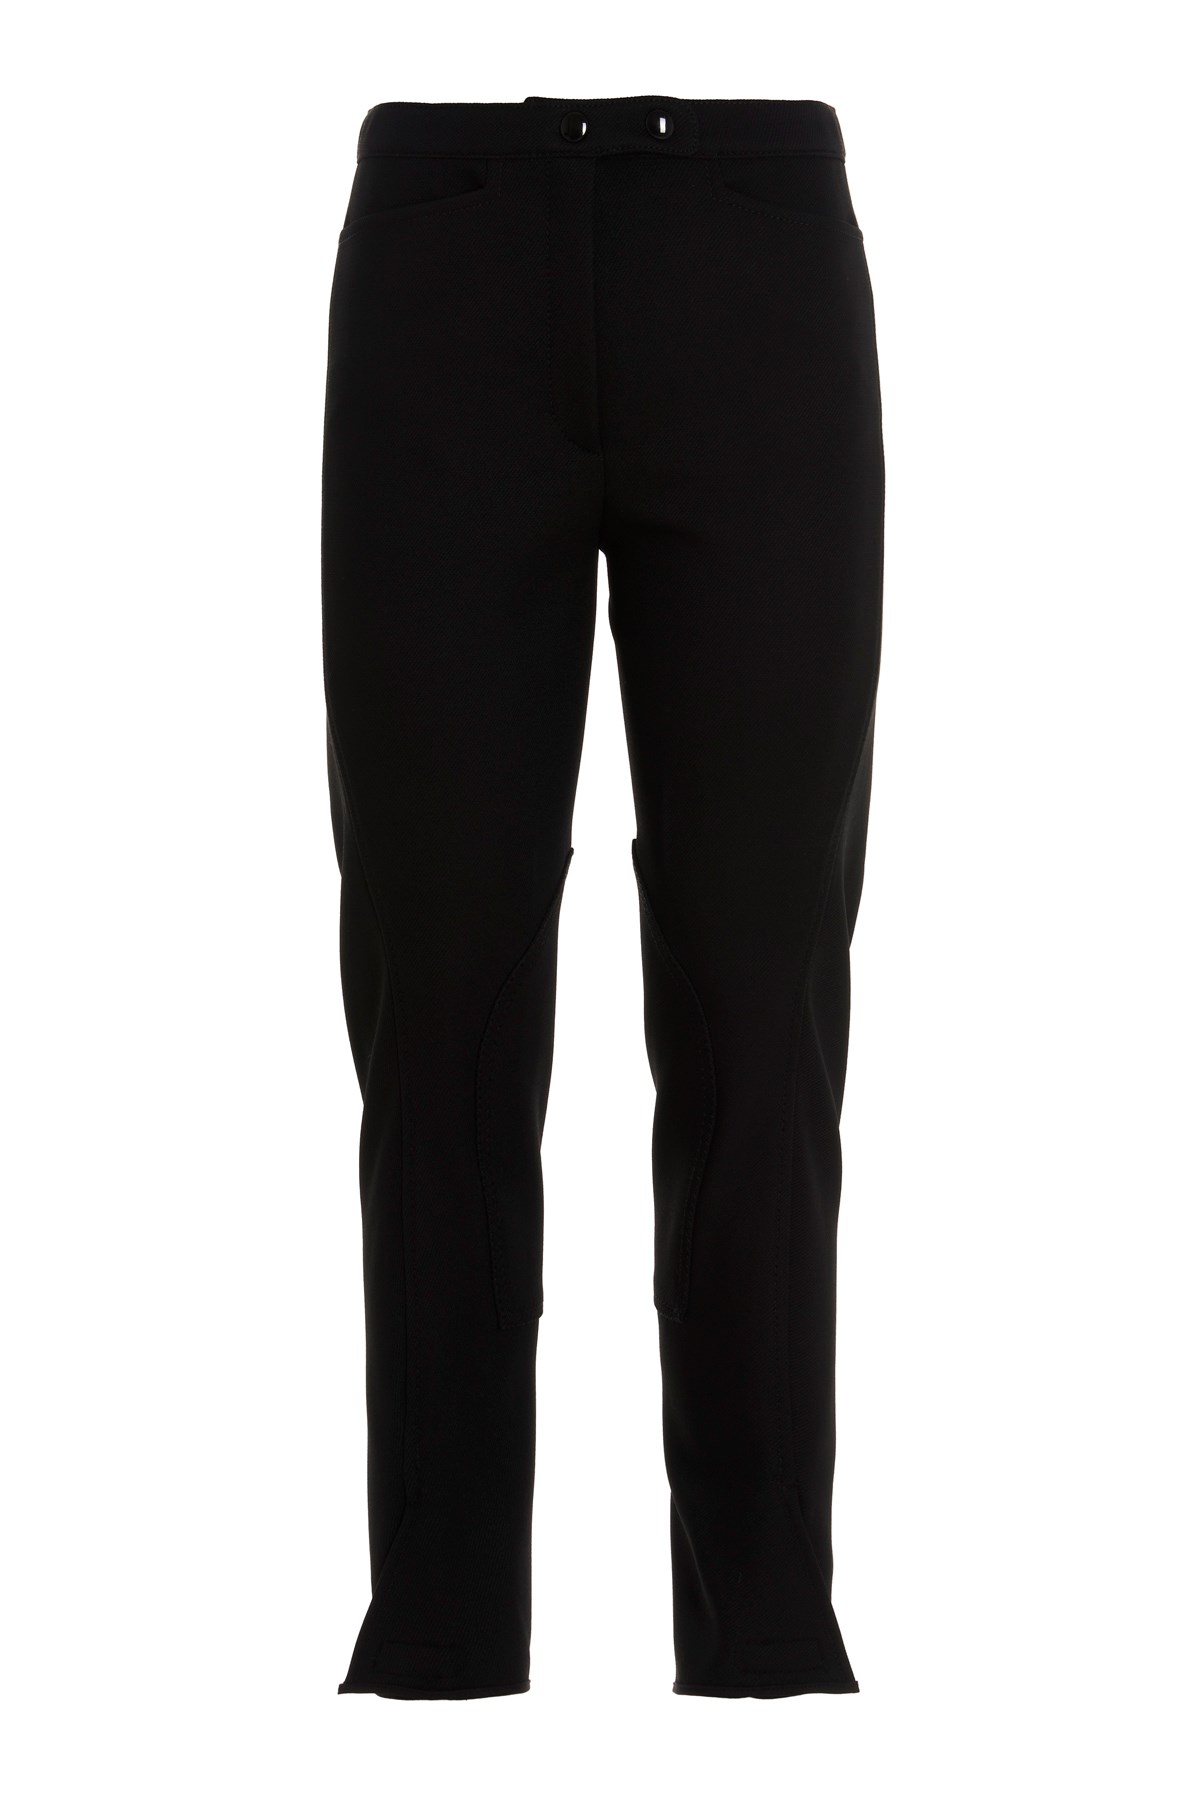 PHILOSOPHY Velcro Detailing Trousers